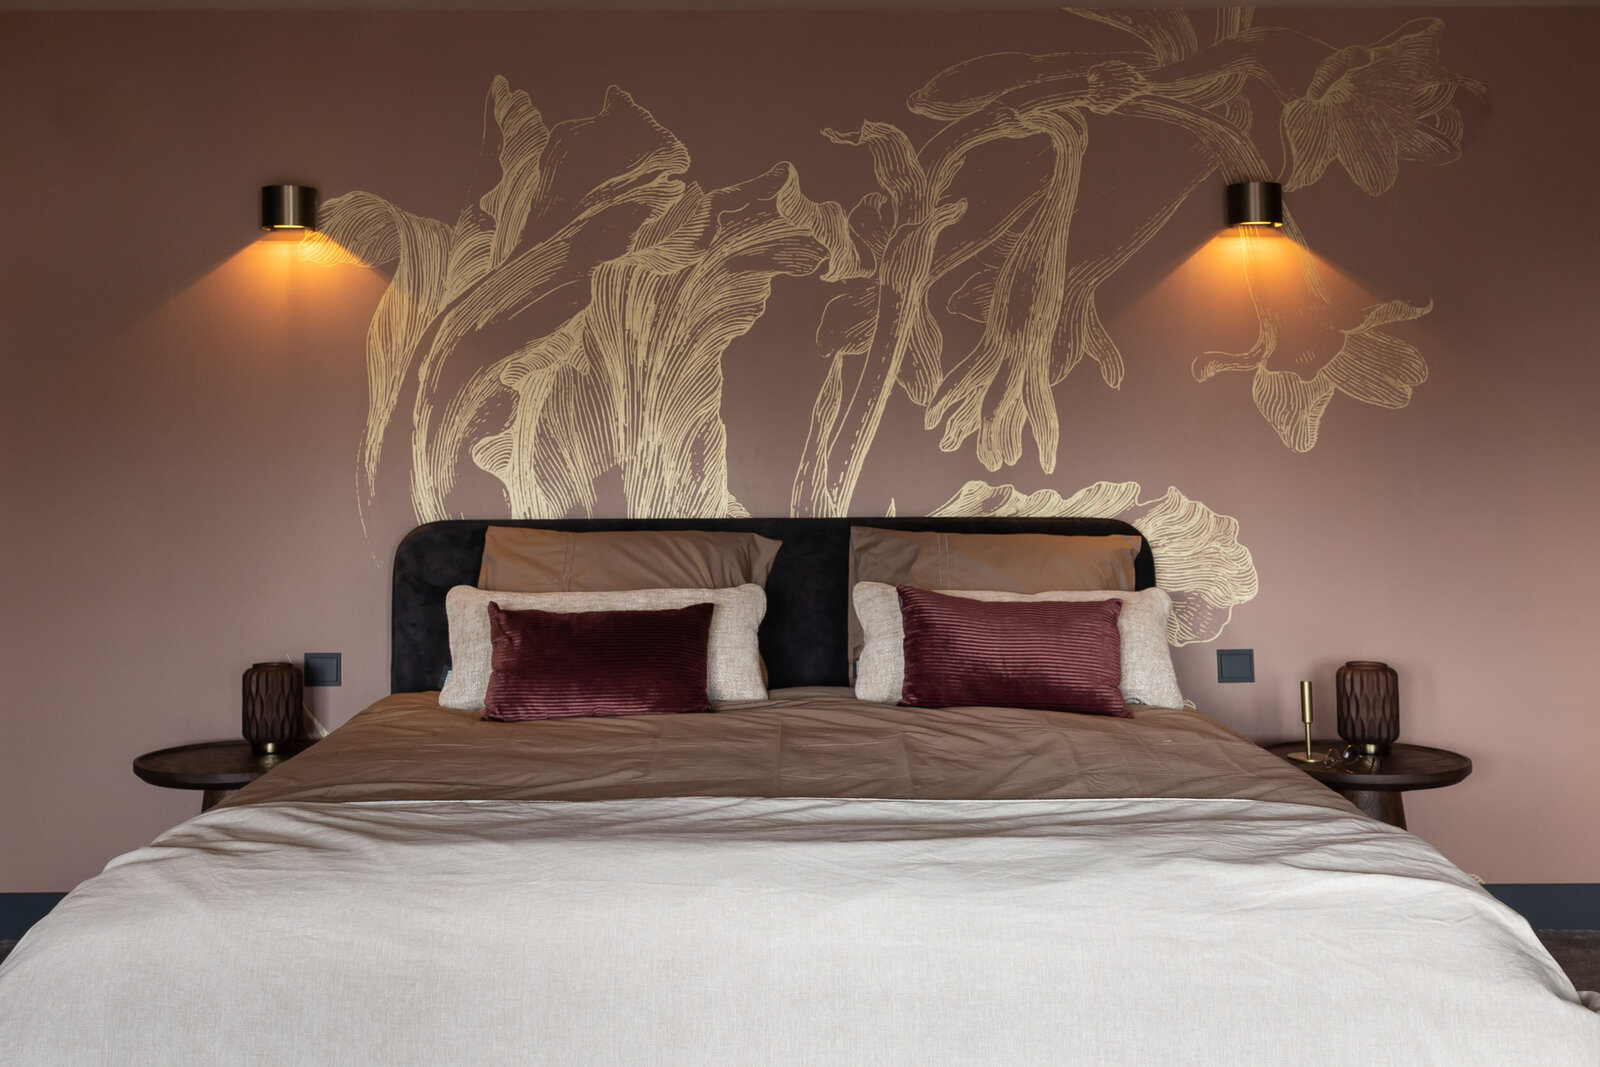 Luxury hotel bedroom stylishly decorated. The warm brown and gold colors give the room a luxury feeling..